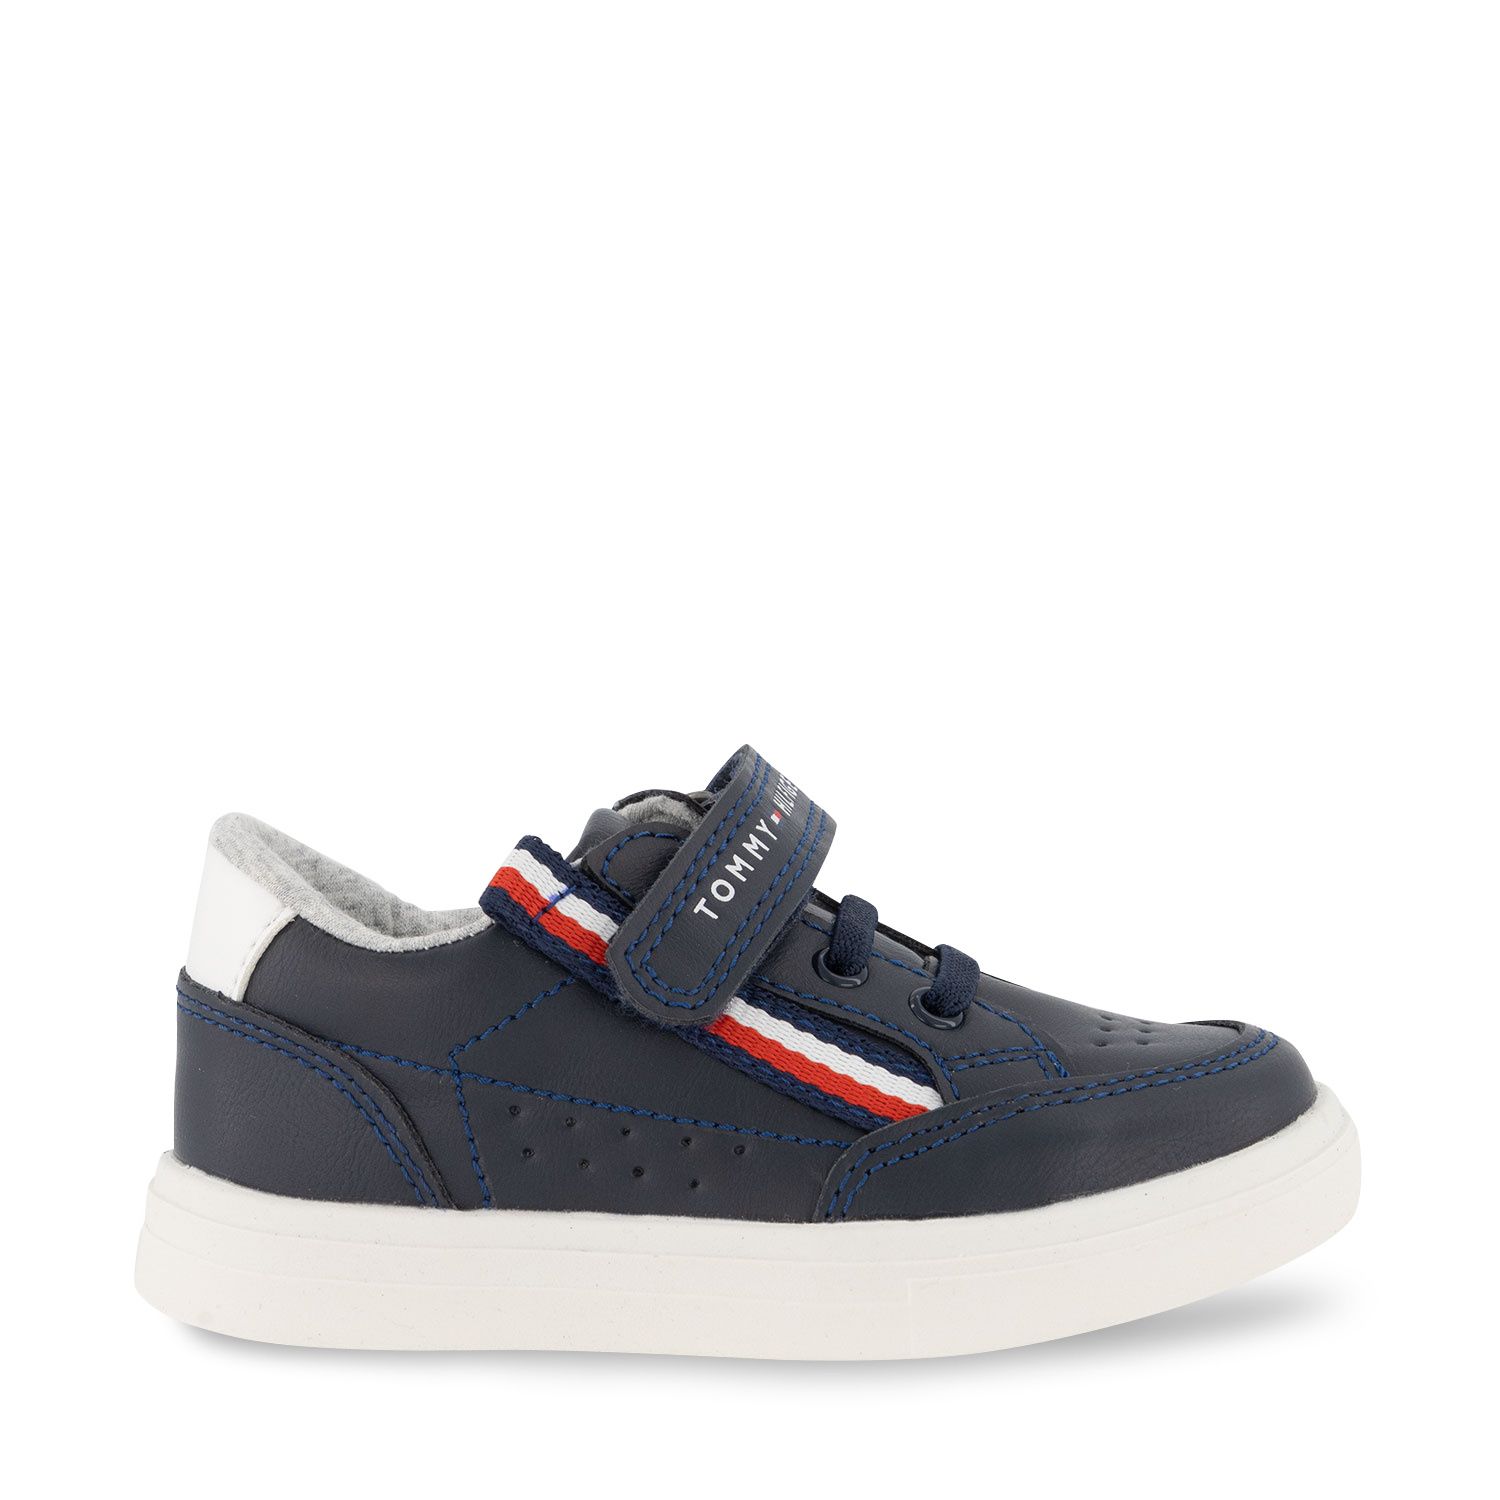 Picture of Tommy Hilfiger 32210 kids sneakers navy